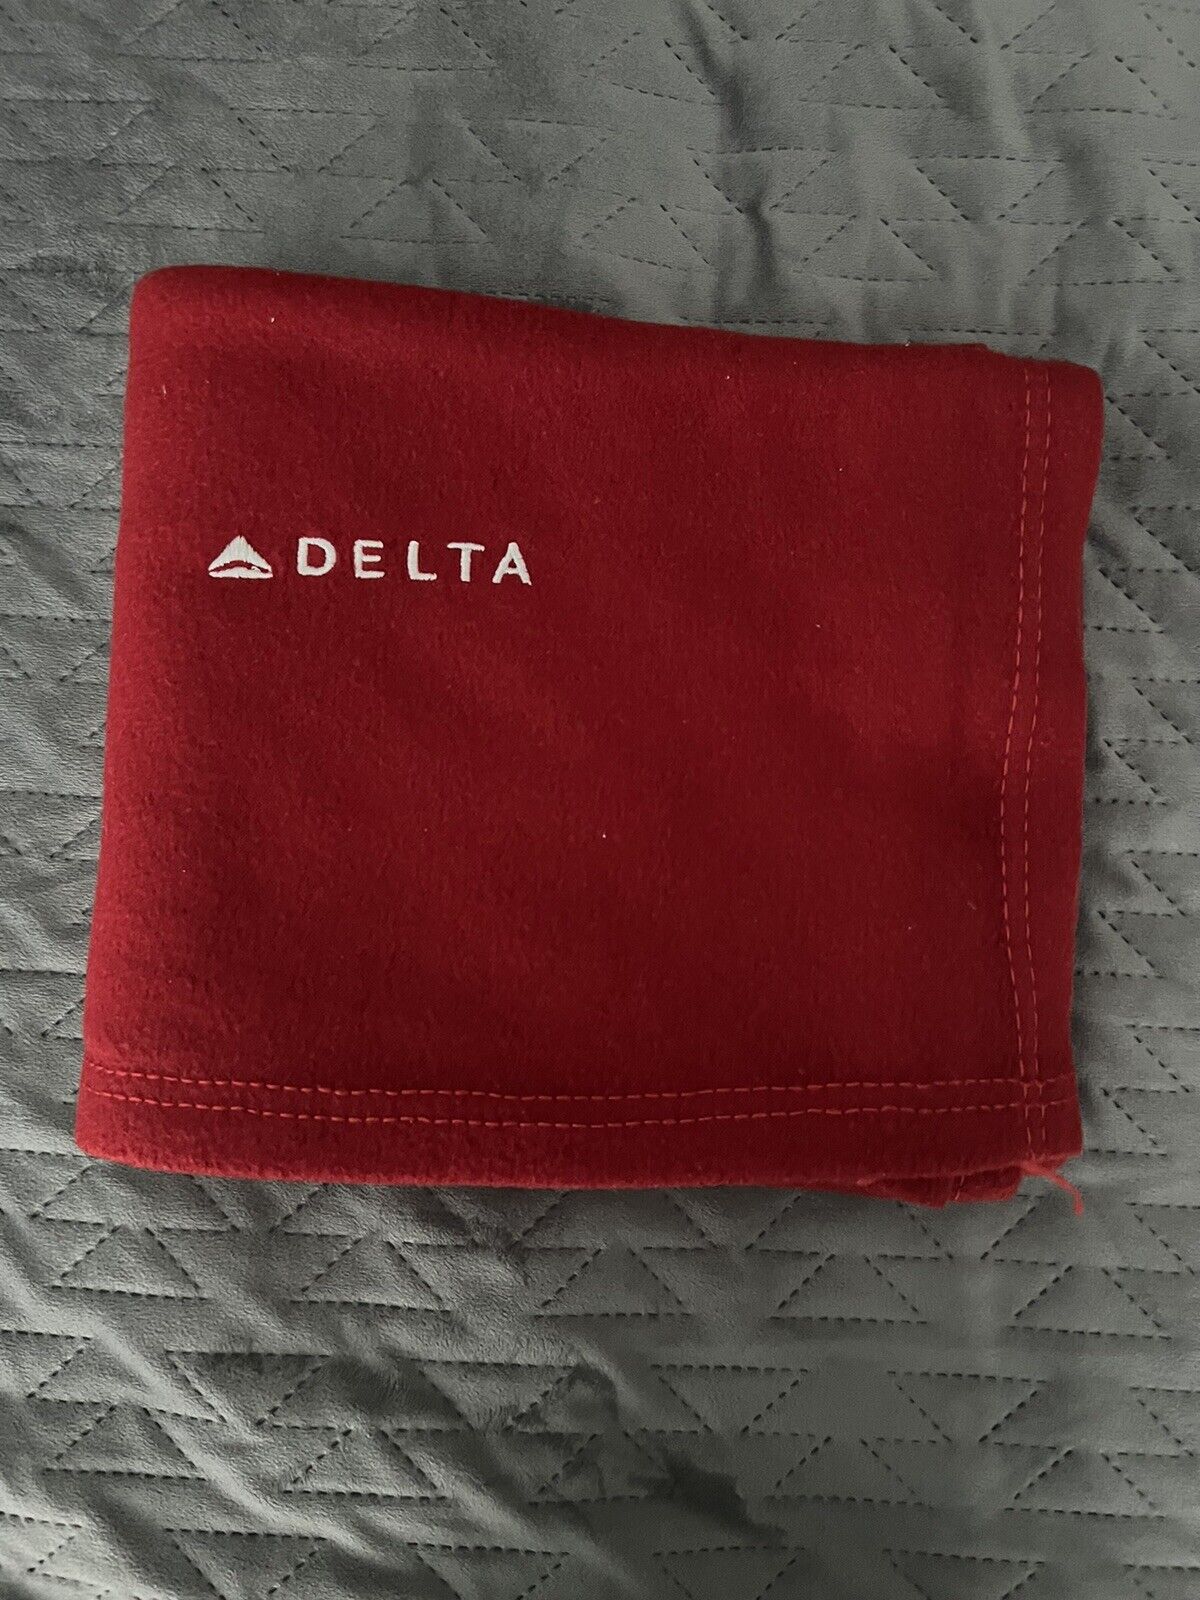 Delta Airlines Embroidered Logo Red Lap In Flight Blanket Approximately 45”x 56”